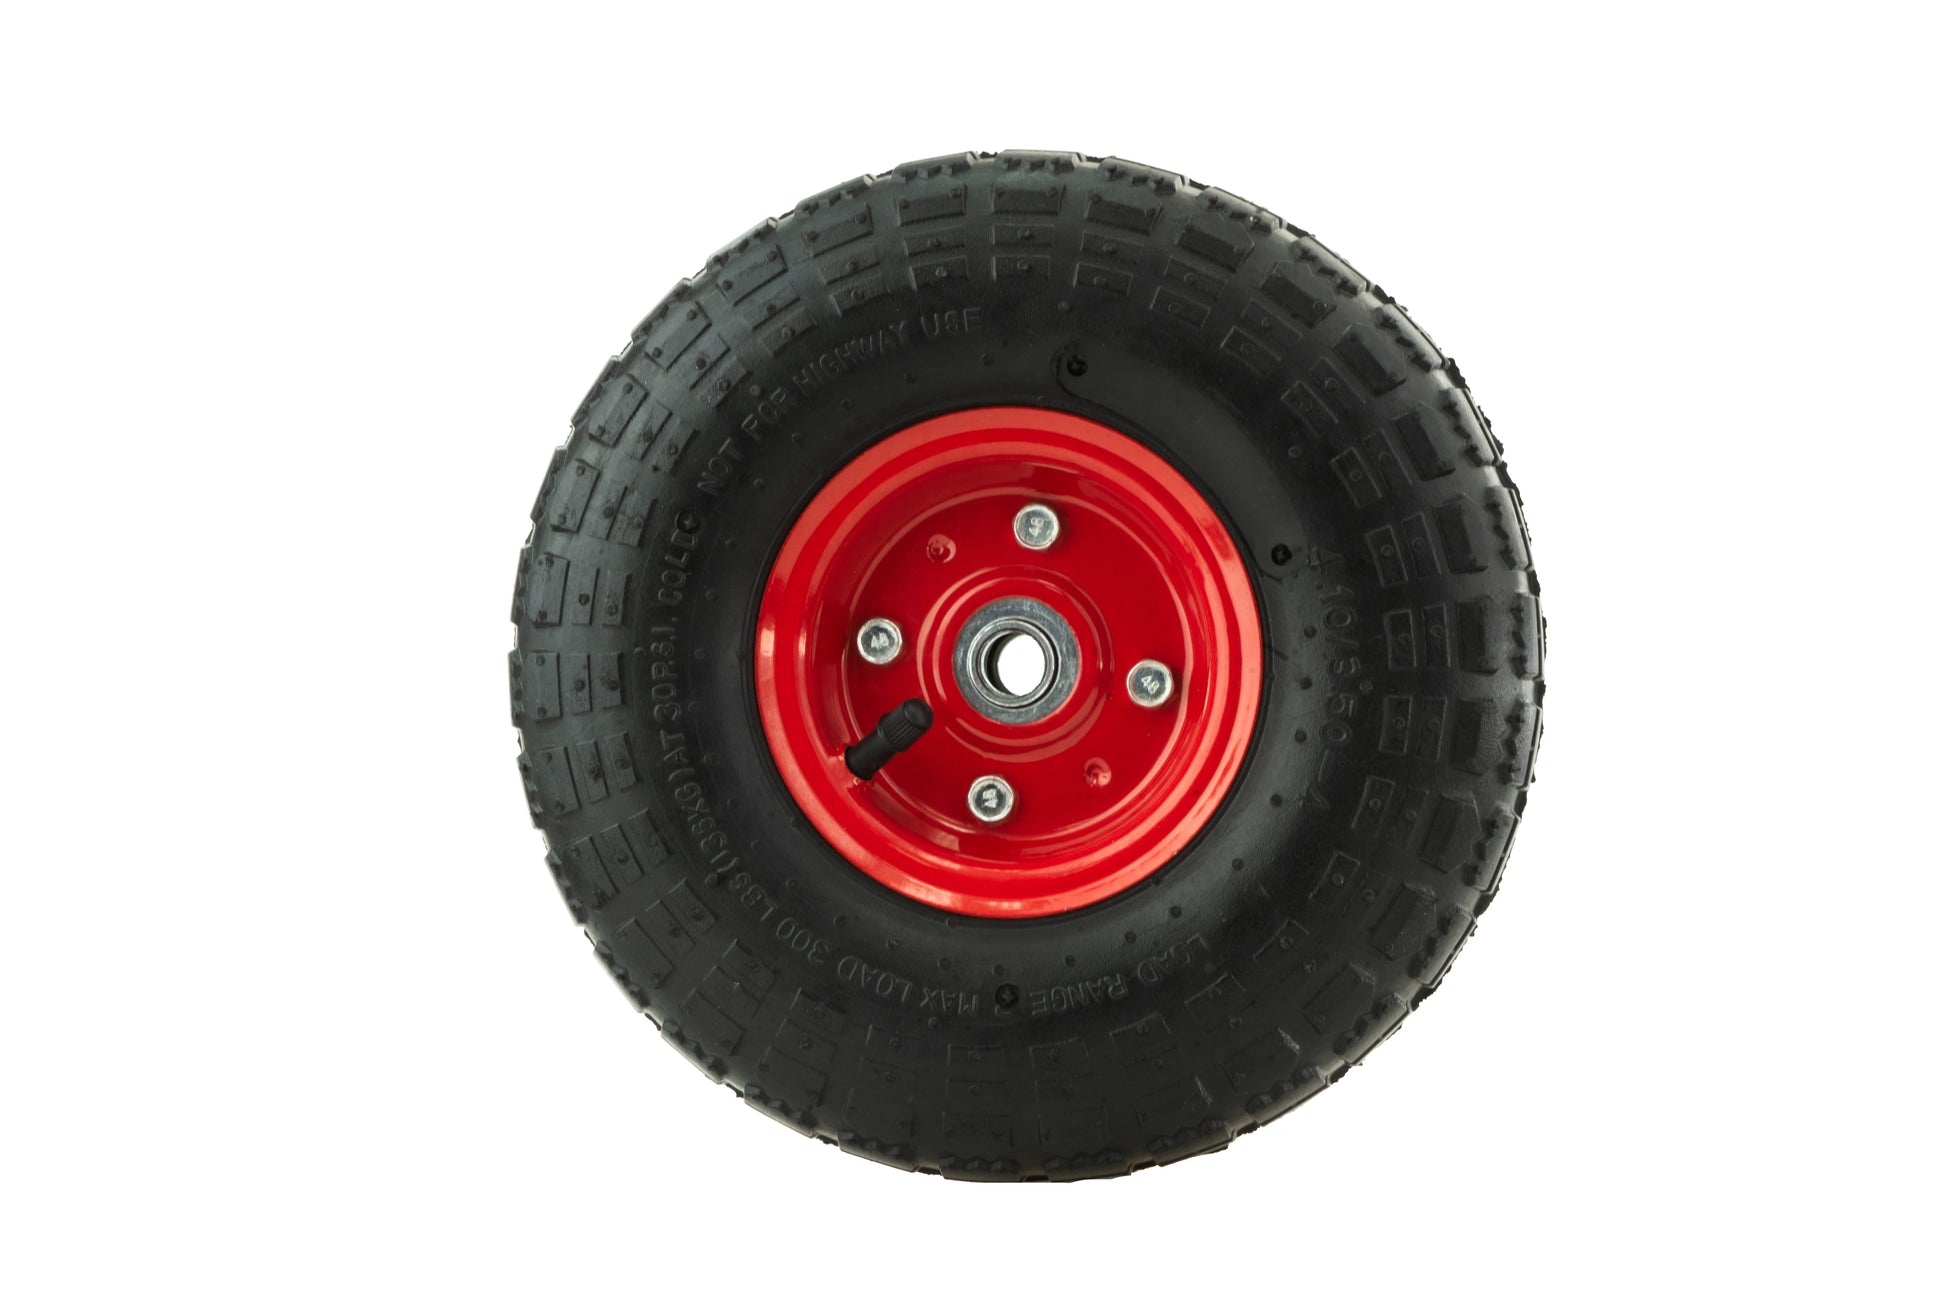 Lapp Wheels 4.10/3.50-4 Heavy Duty Pneumatic Tire Wagon/Hand Truck/Dolly  cart/Mower Replacement, (2-Pack W/Pushnuts)